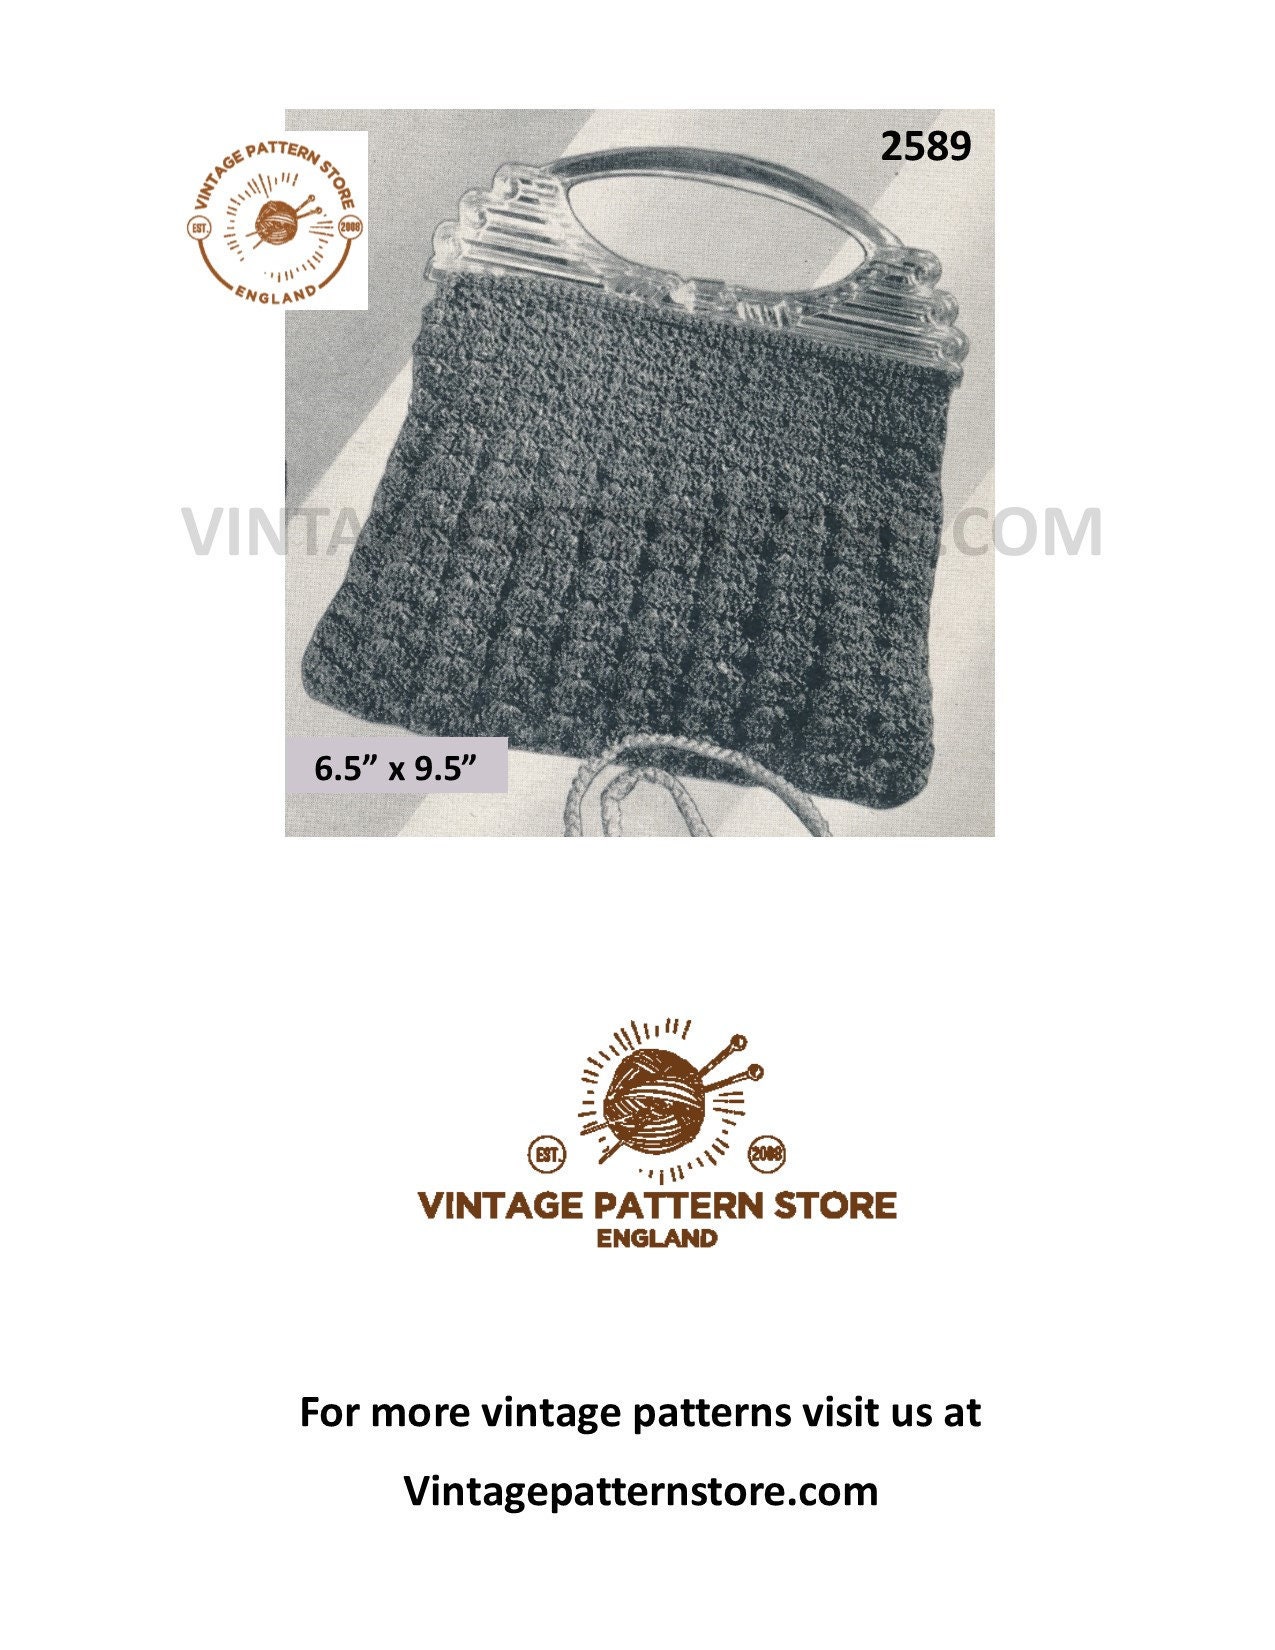 Jolly Dolly Bags 6 15cm, Child's Knitted Bag Pattern Bag Knitting Pattern  INSTANT DOWNLOAD - Etsy